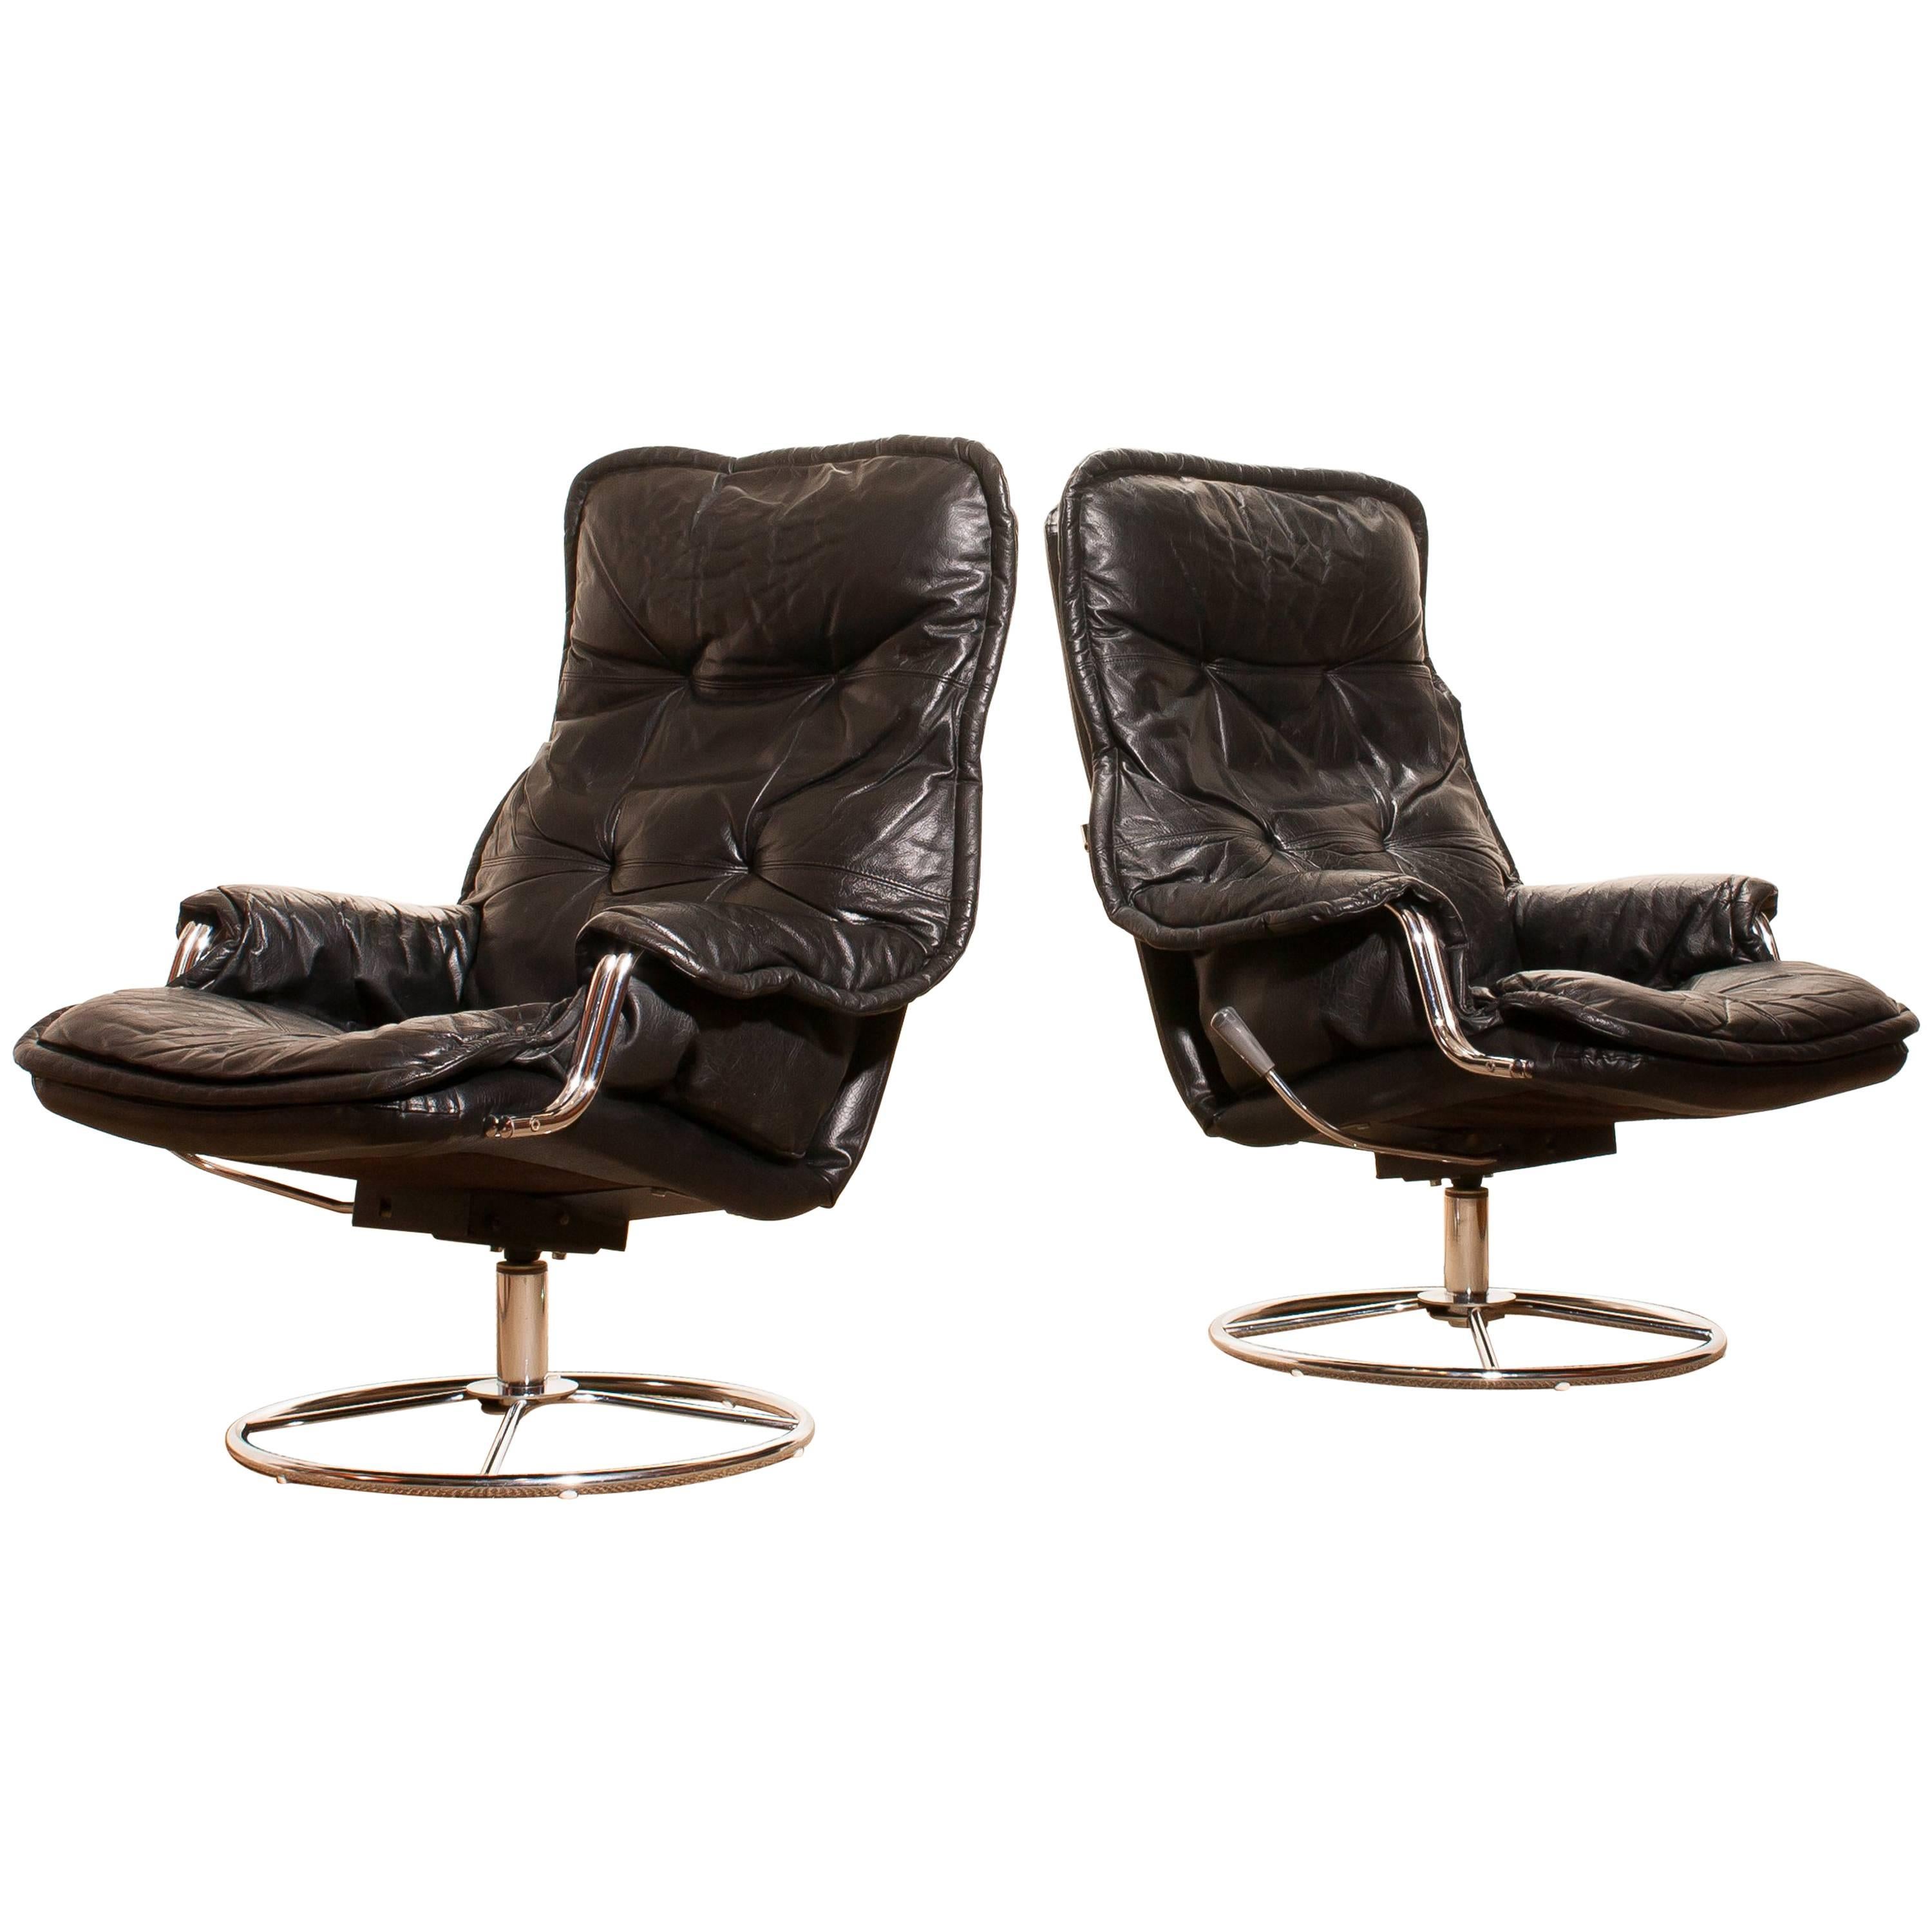 1970s, a Pair of Black Leather Swivel Chrome Steel Lounge Chairs , Sweden